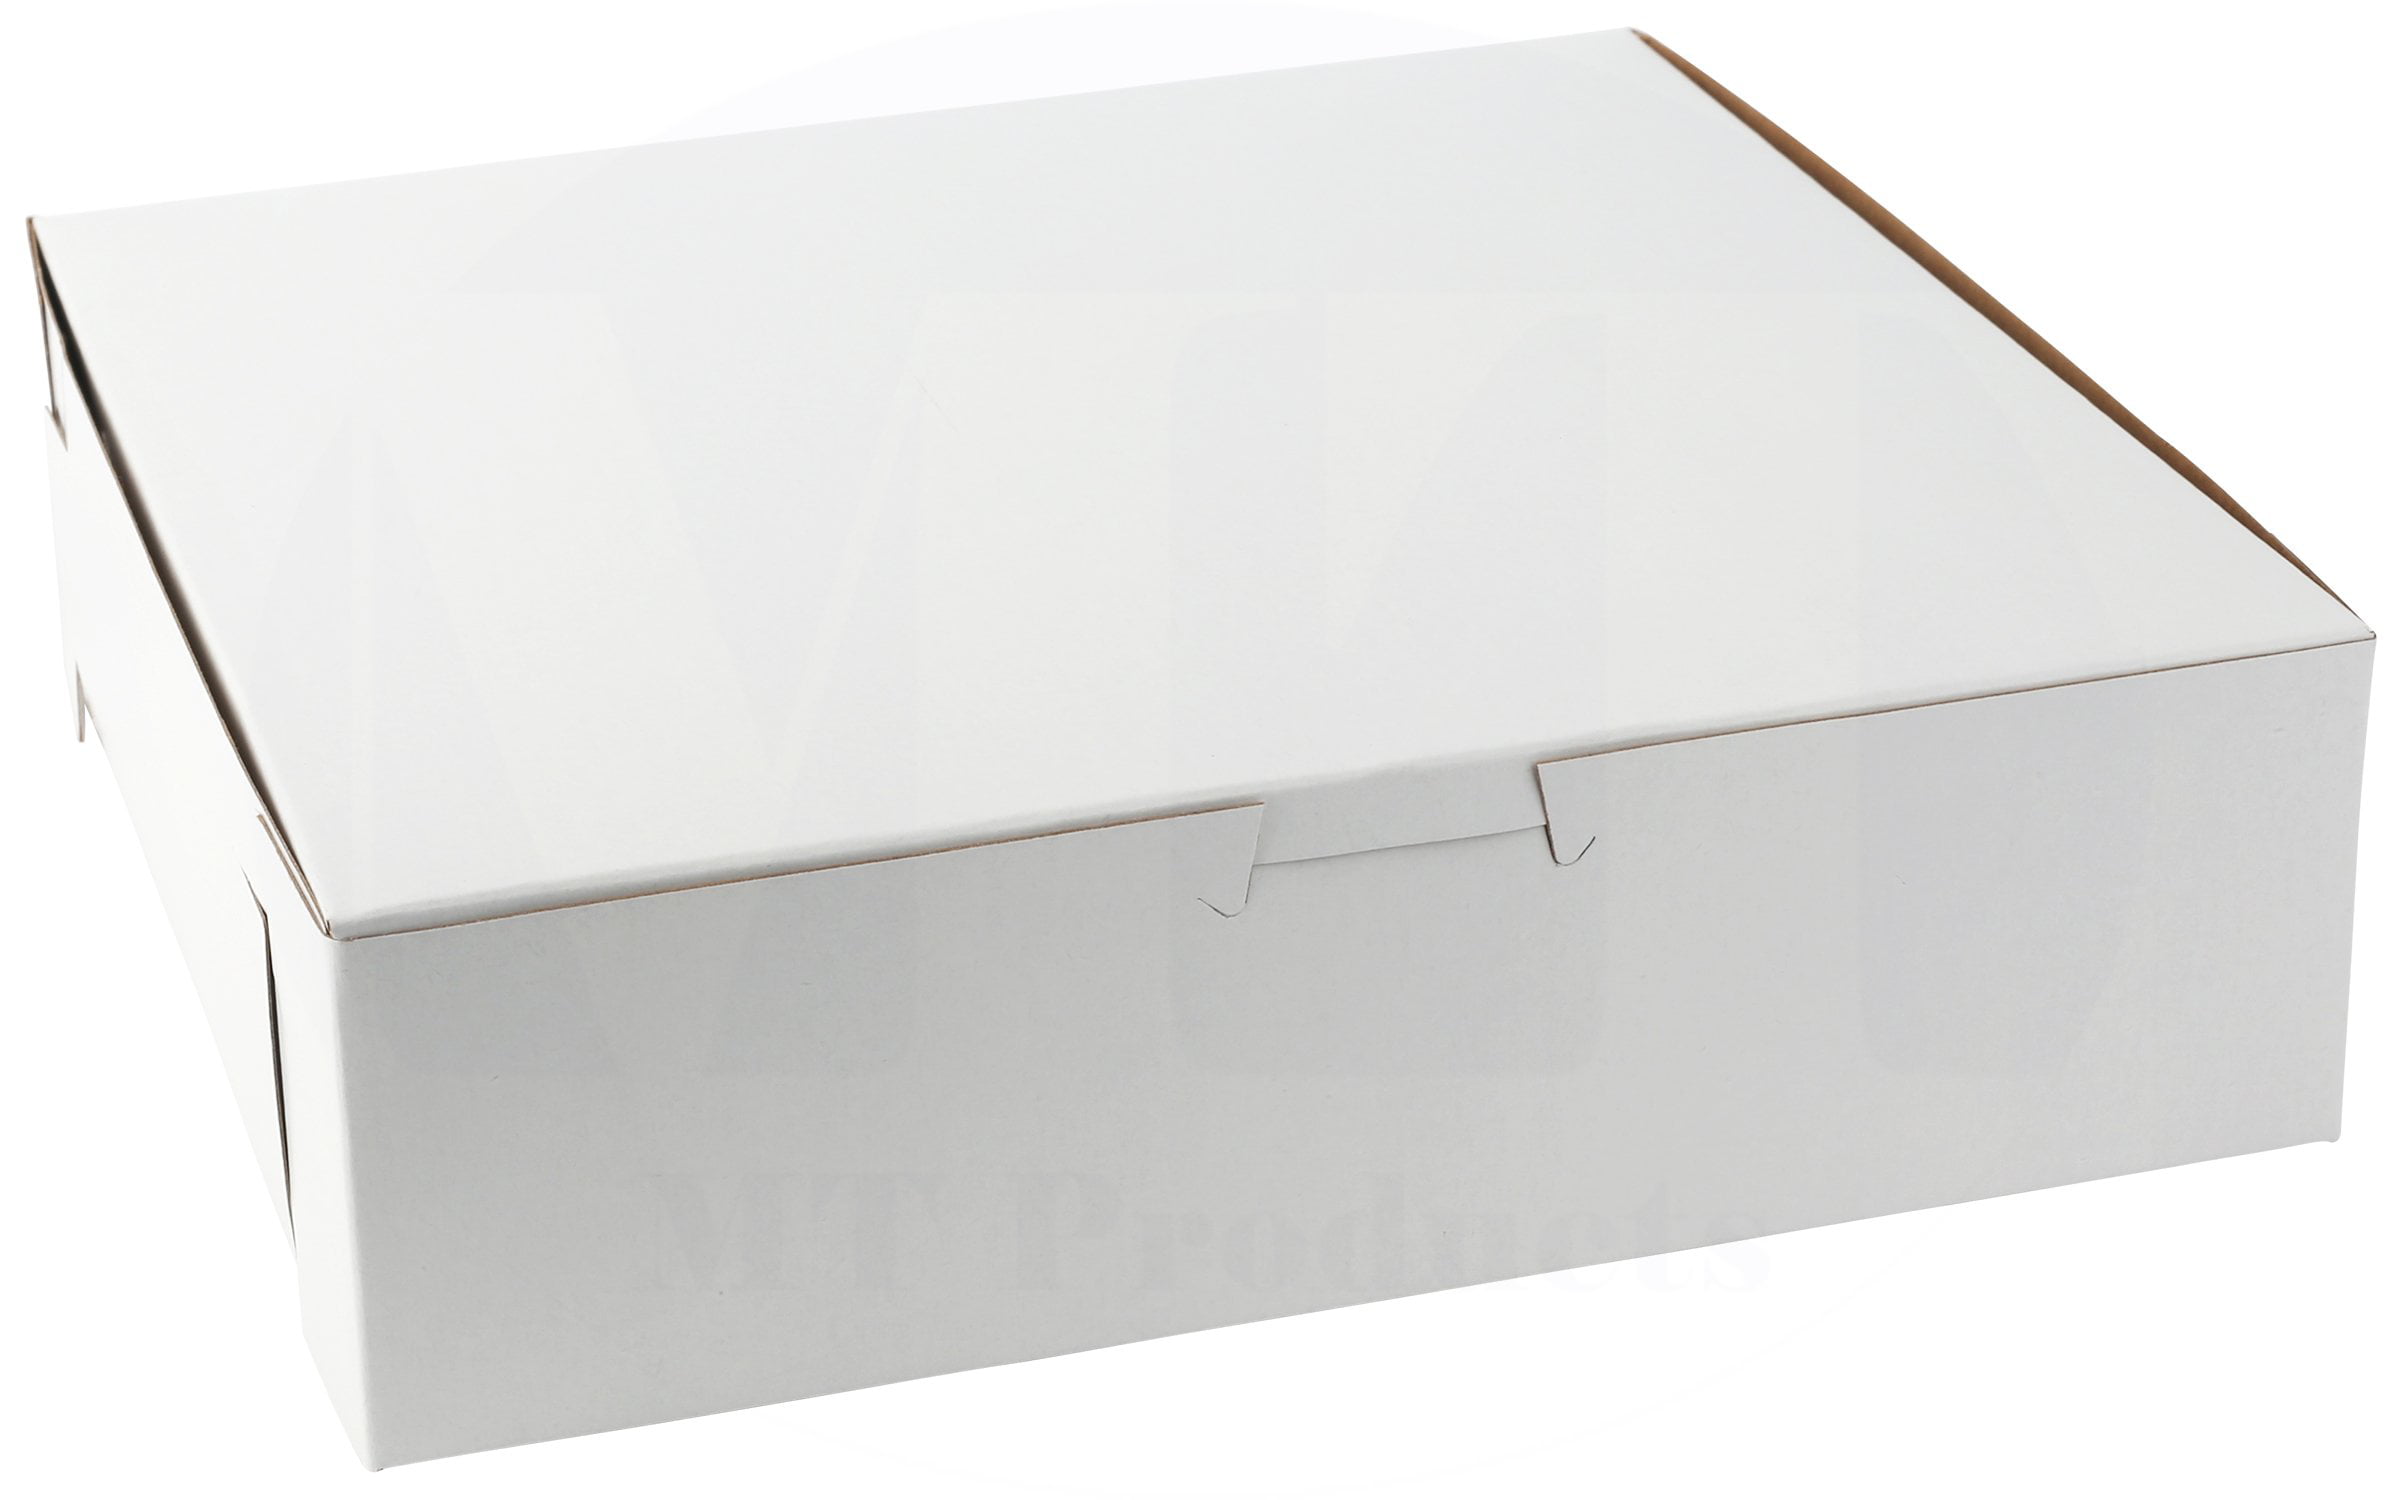 Pack of 15 5.5" x 5.5" x 4" Clay Coated Paperboard White Bakery Box 